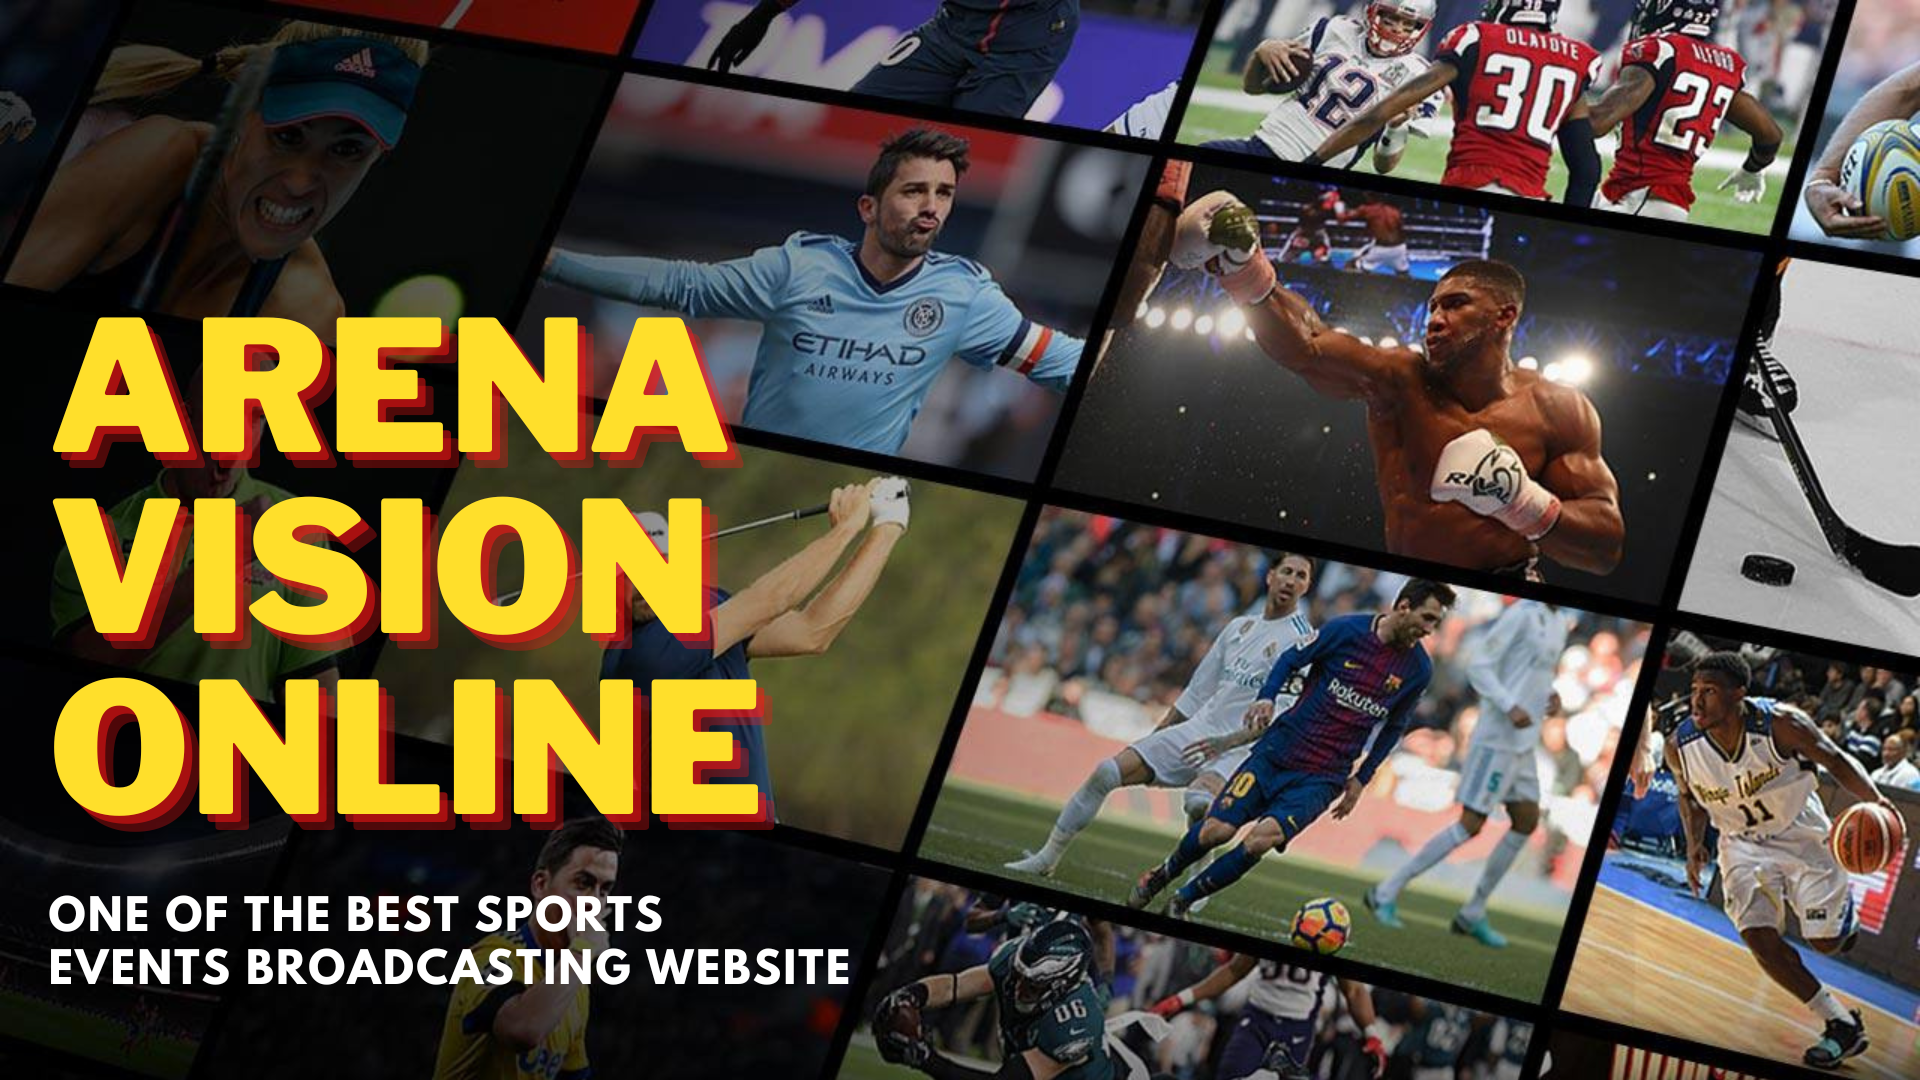 Arenavision Online - One Of The Best Sports Events Broadcasting Website